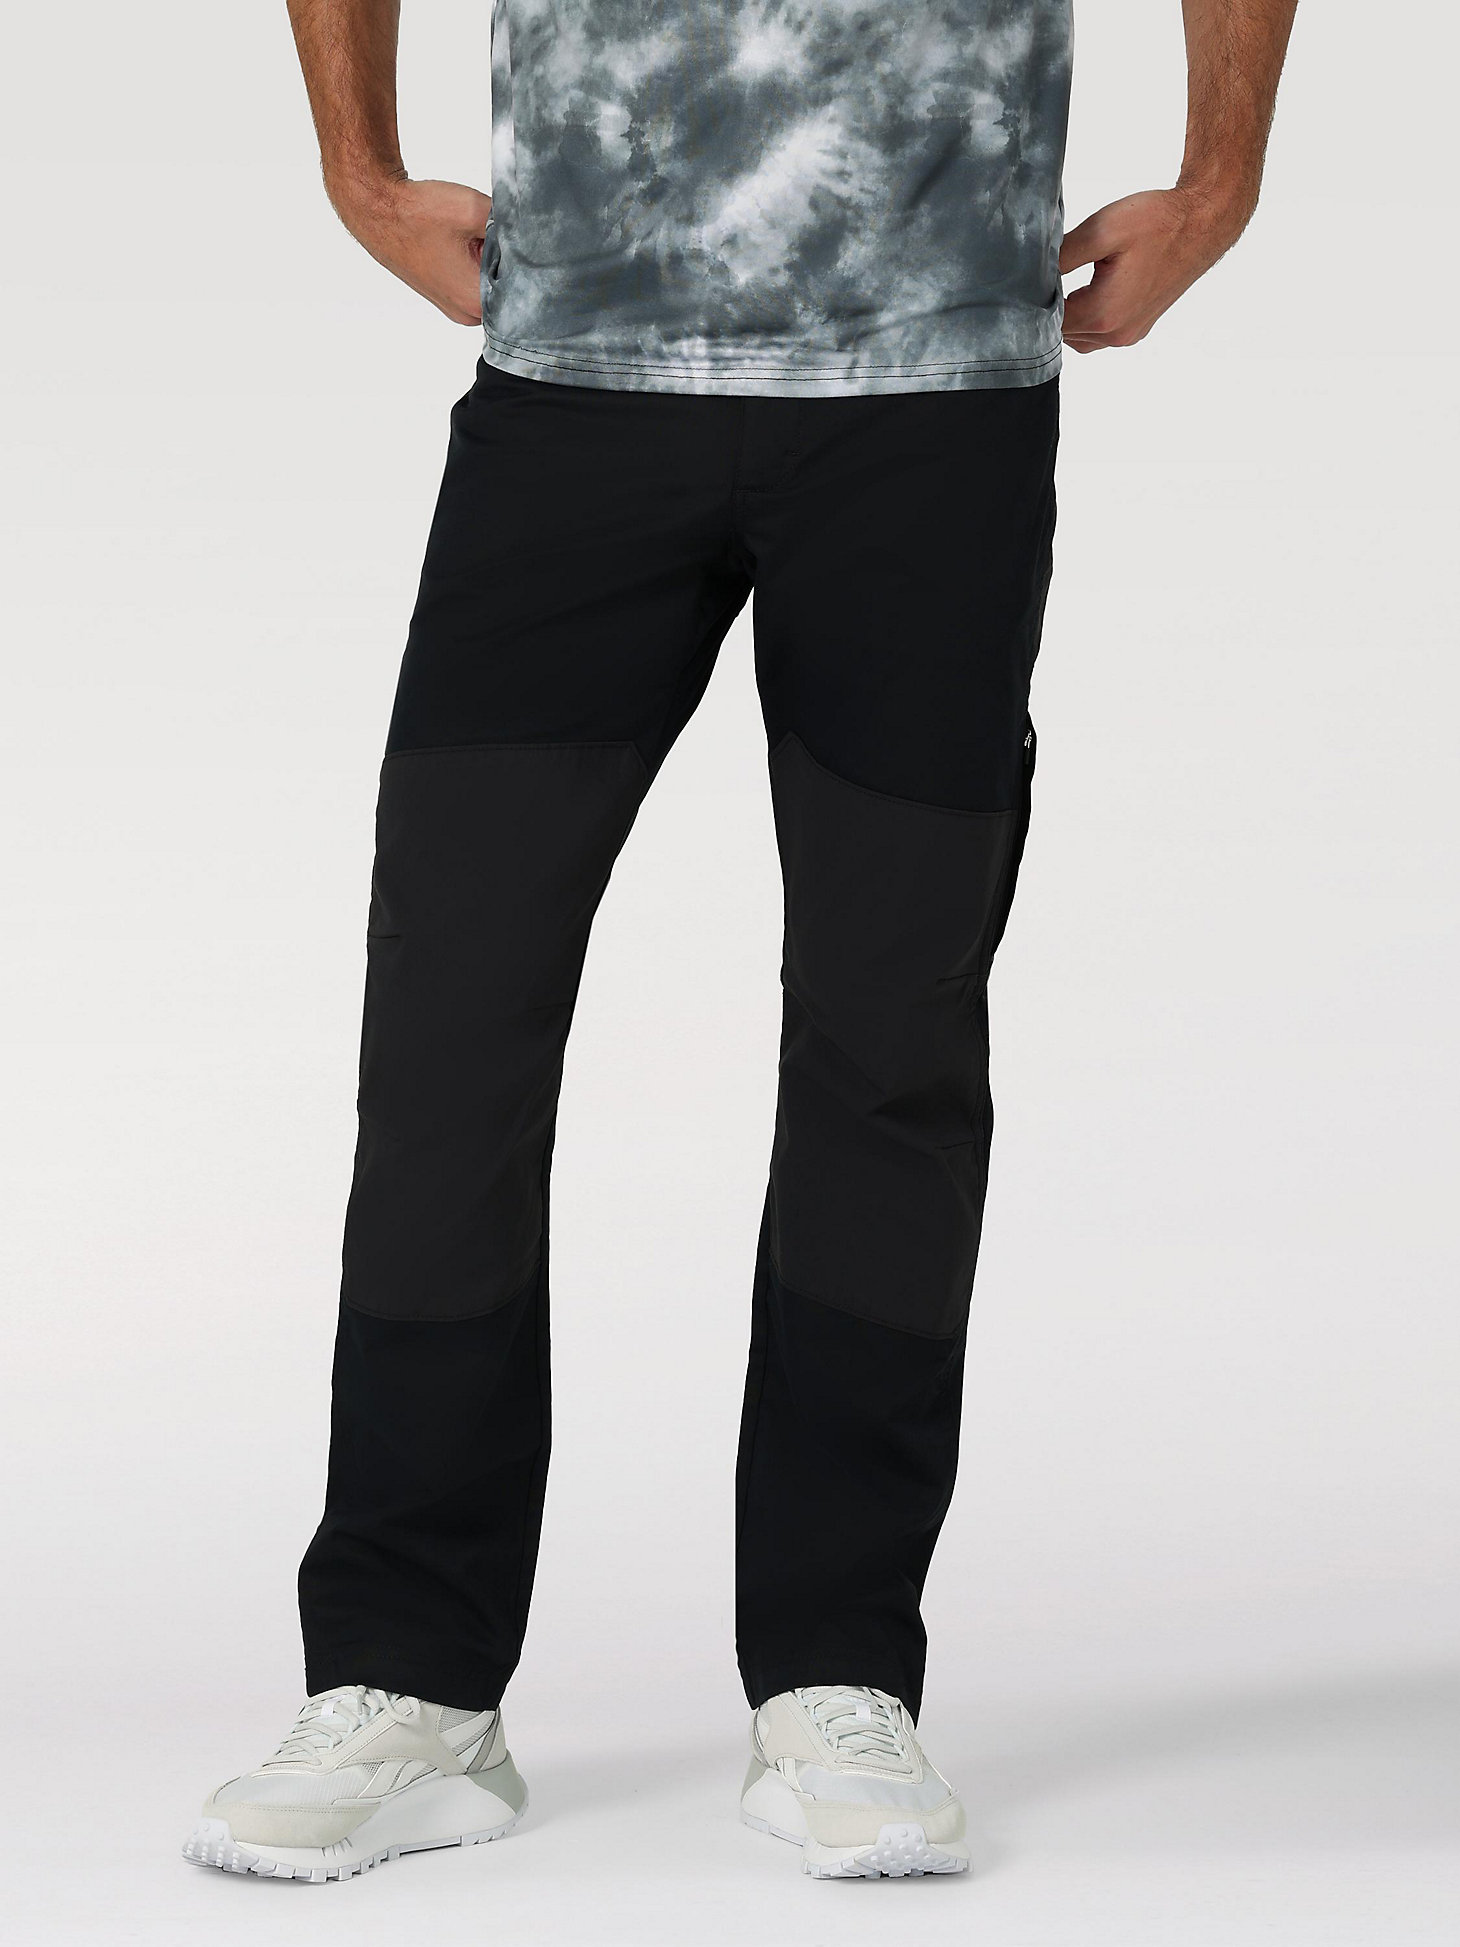 Reinforced Softshell Pant in Black main view